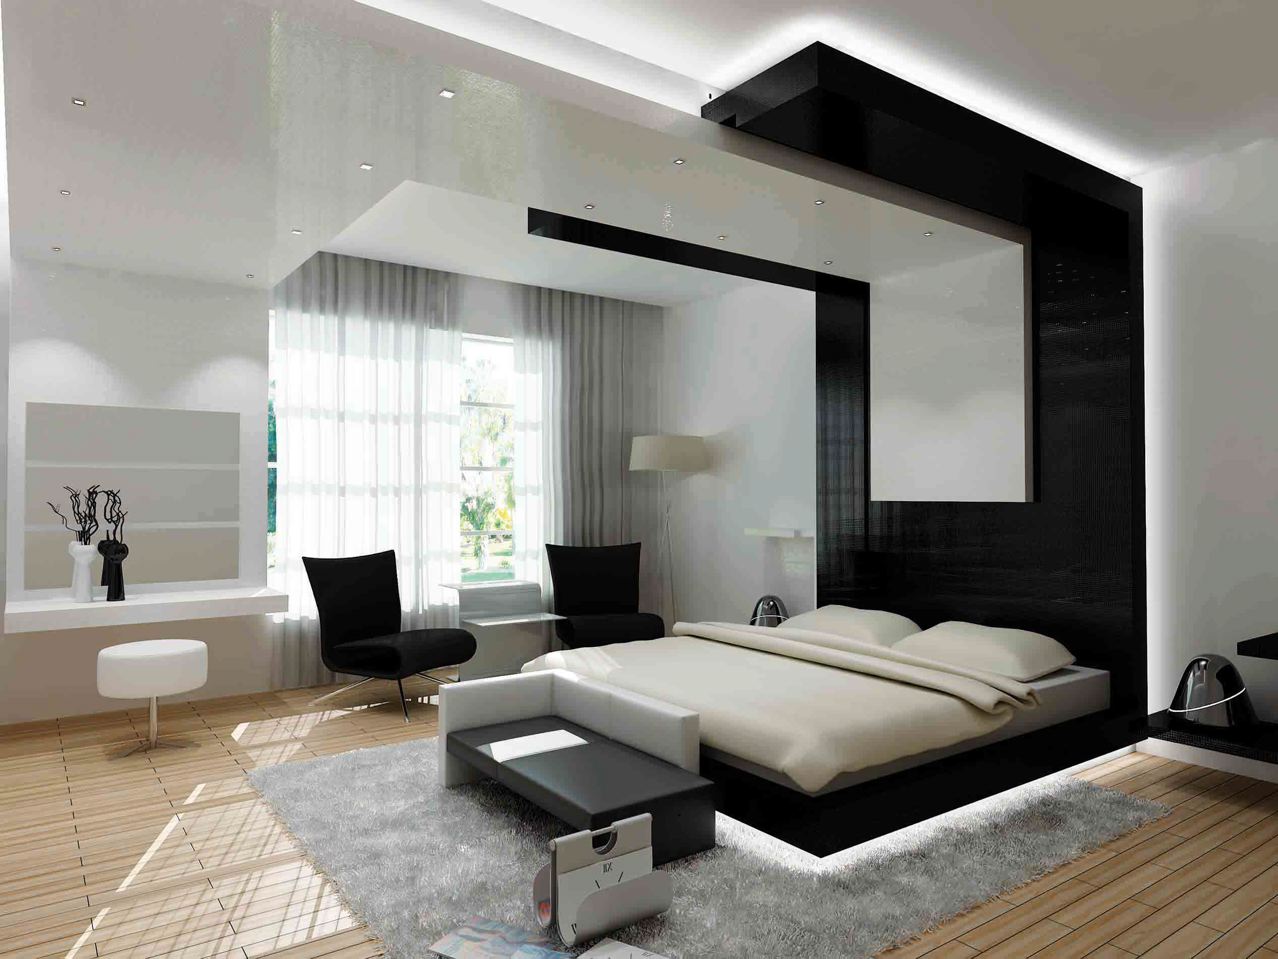 25 Best Bedroom Designs Ideas – The WoW Style